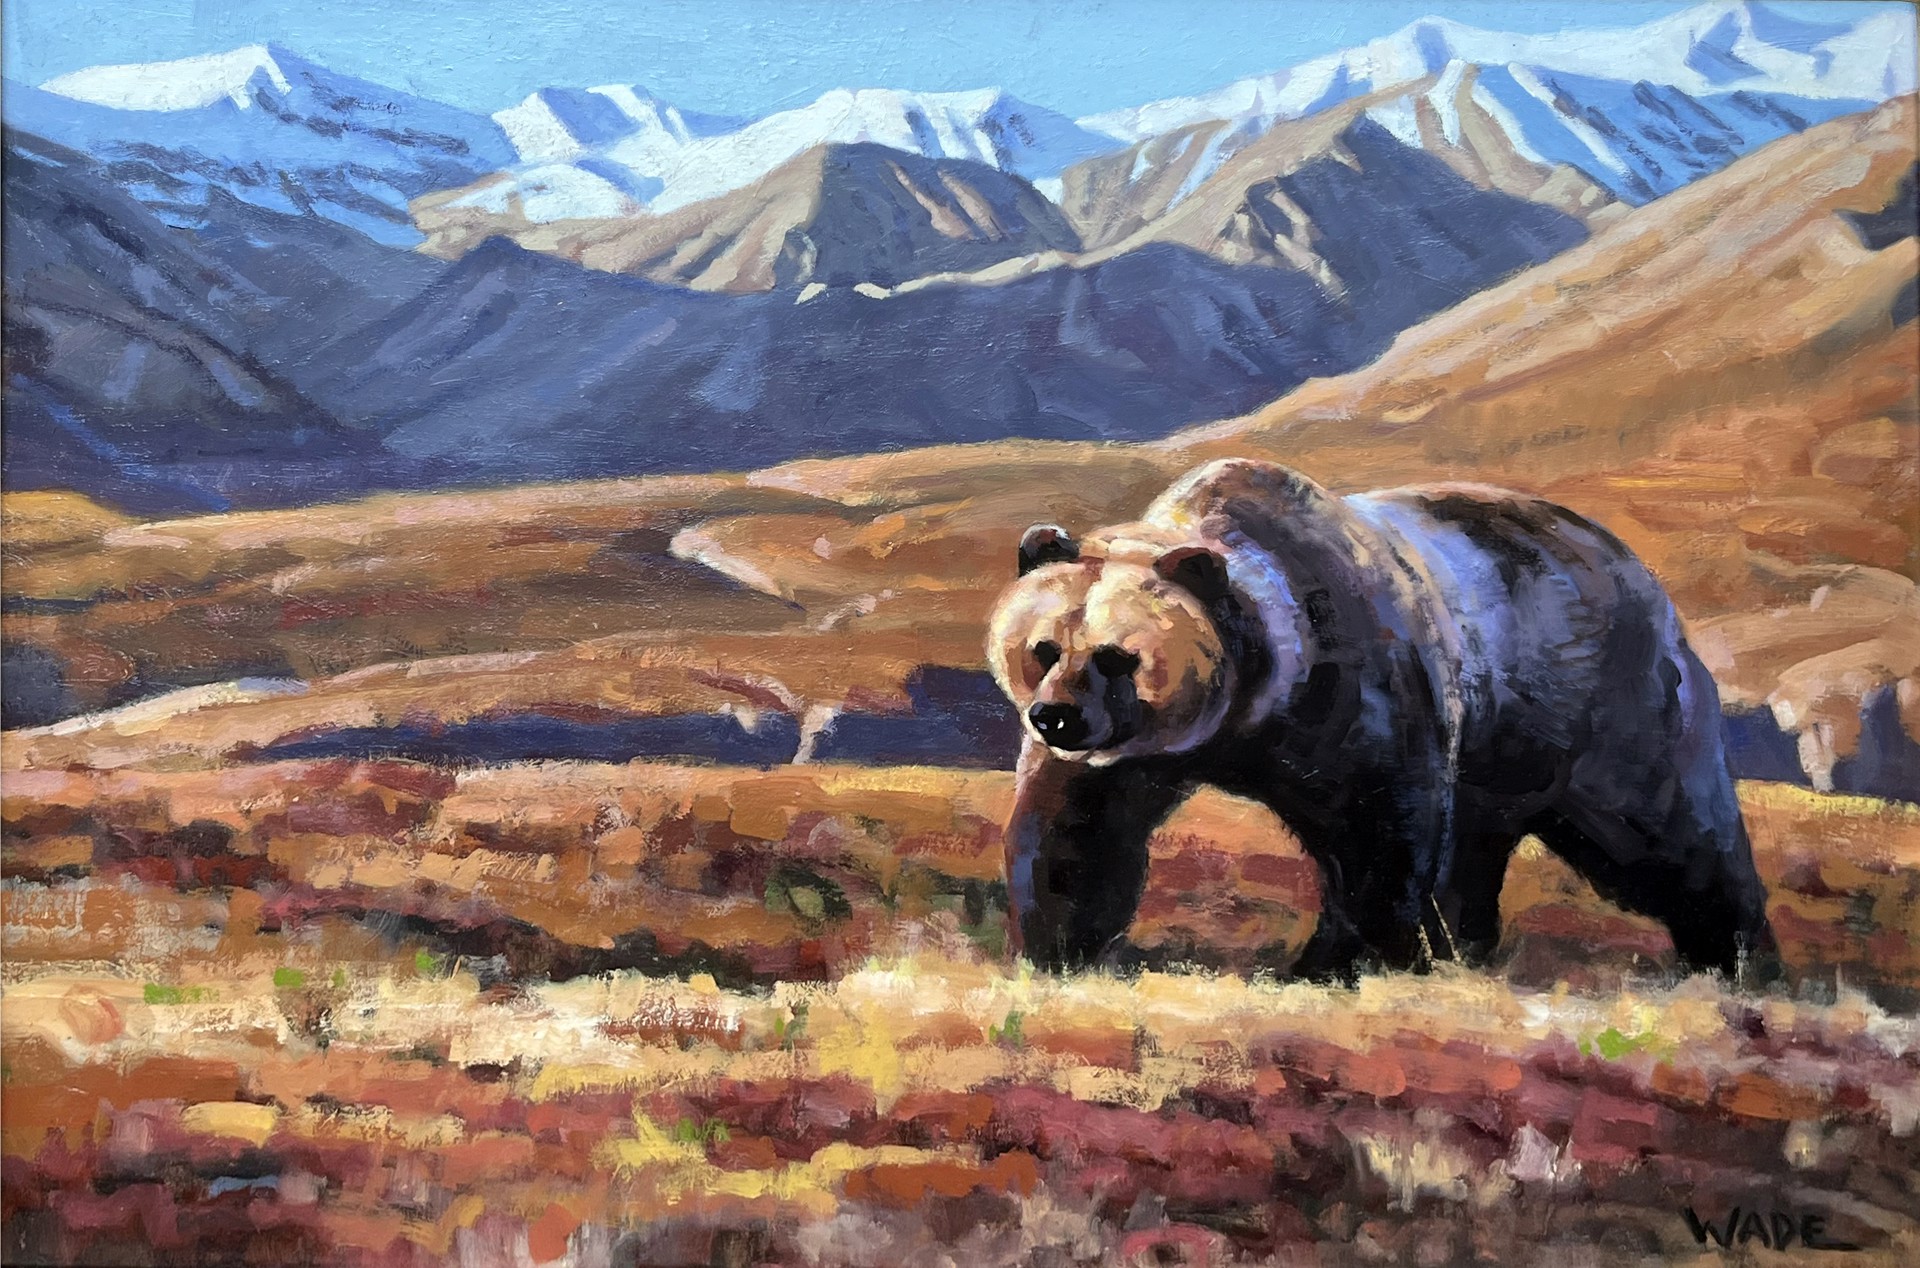 Something Bruin by Dave Wade